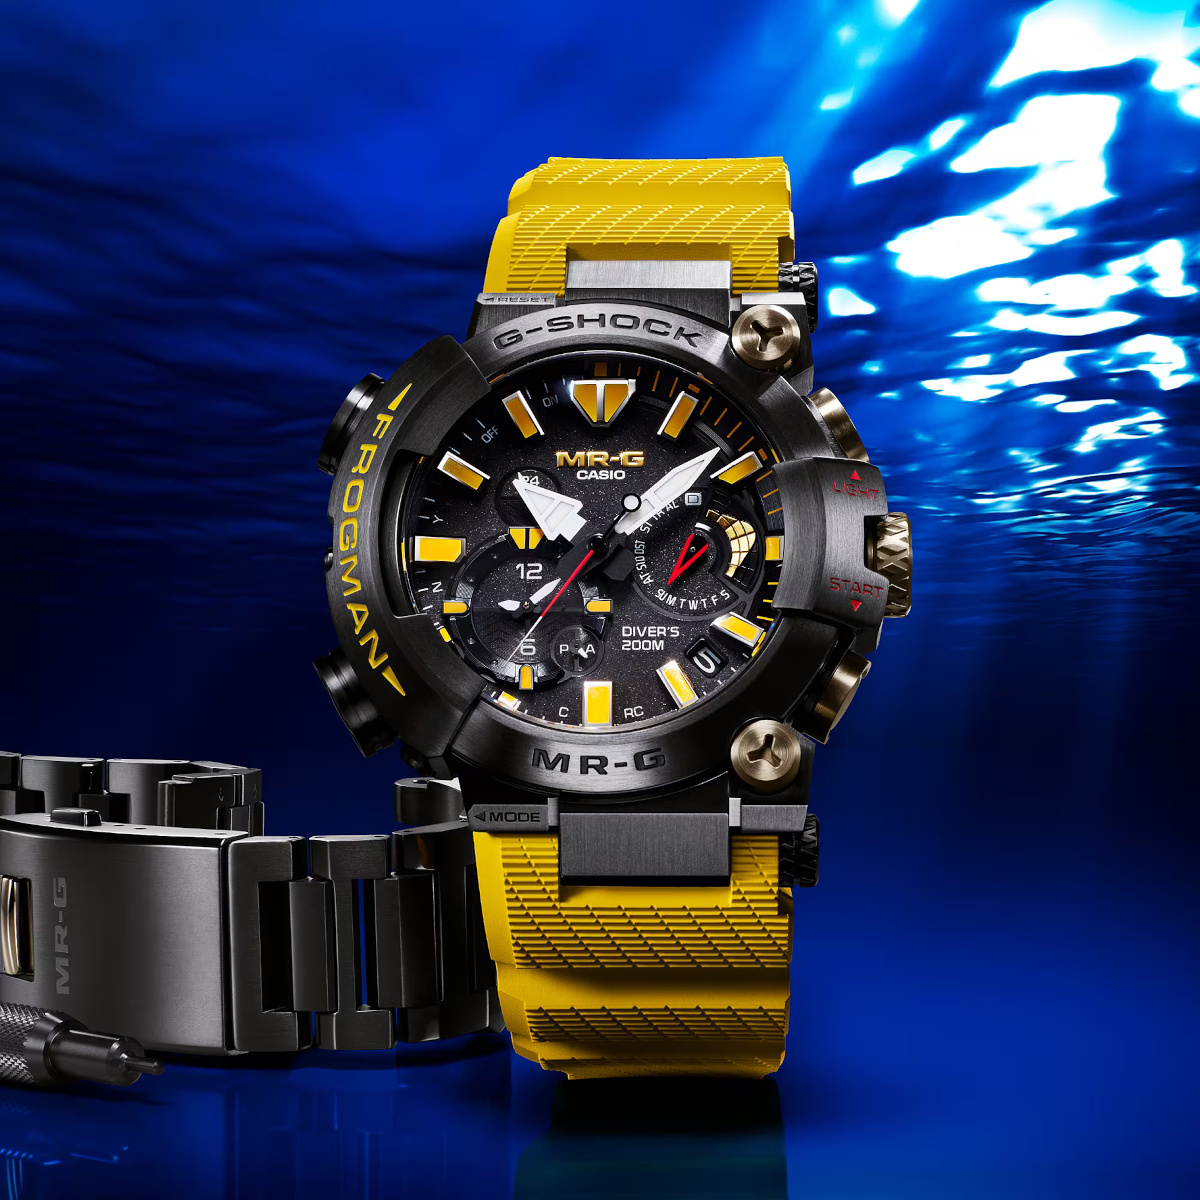 G-Shock Frogman MRG-BF1000E-1A9 includes rubber and titanium bands and ...